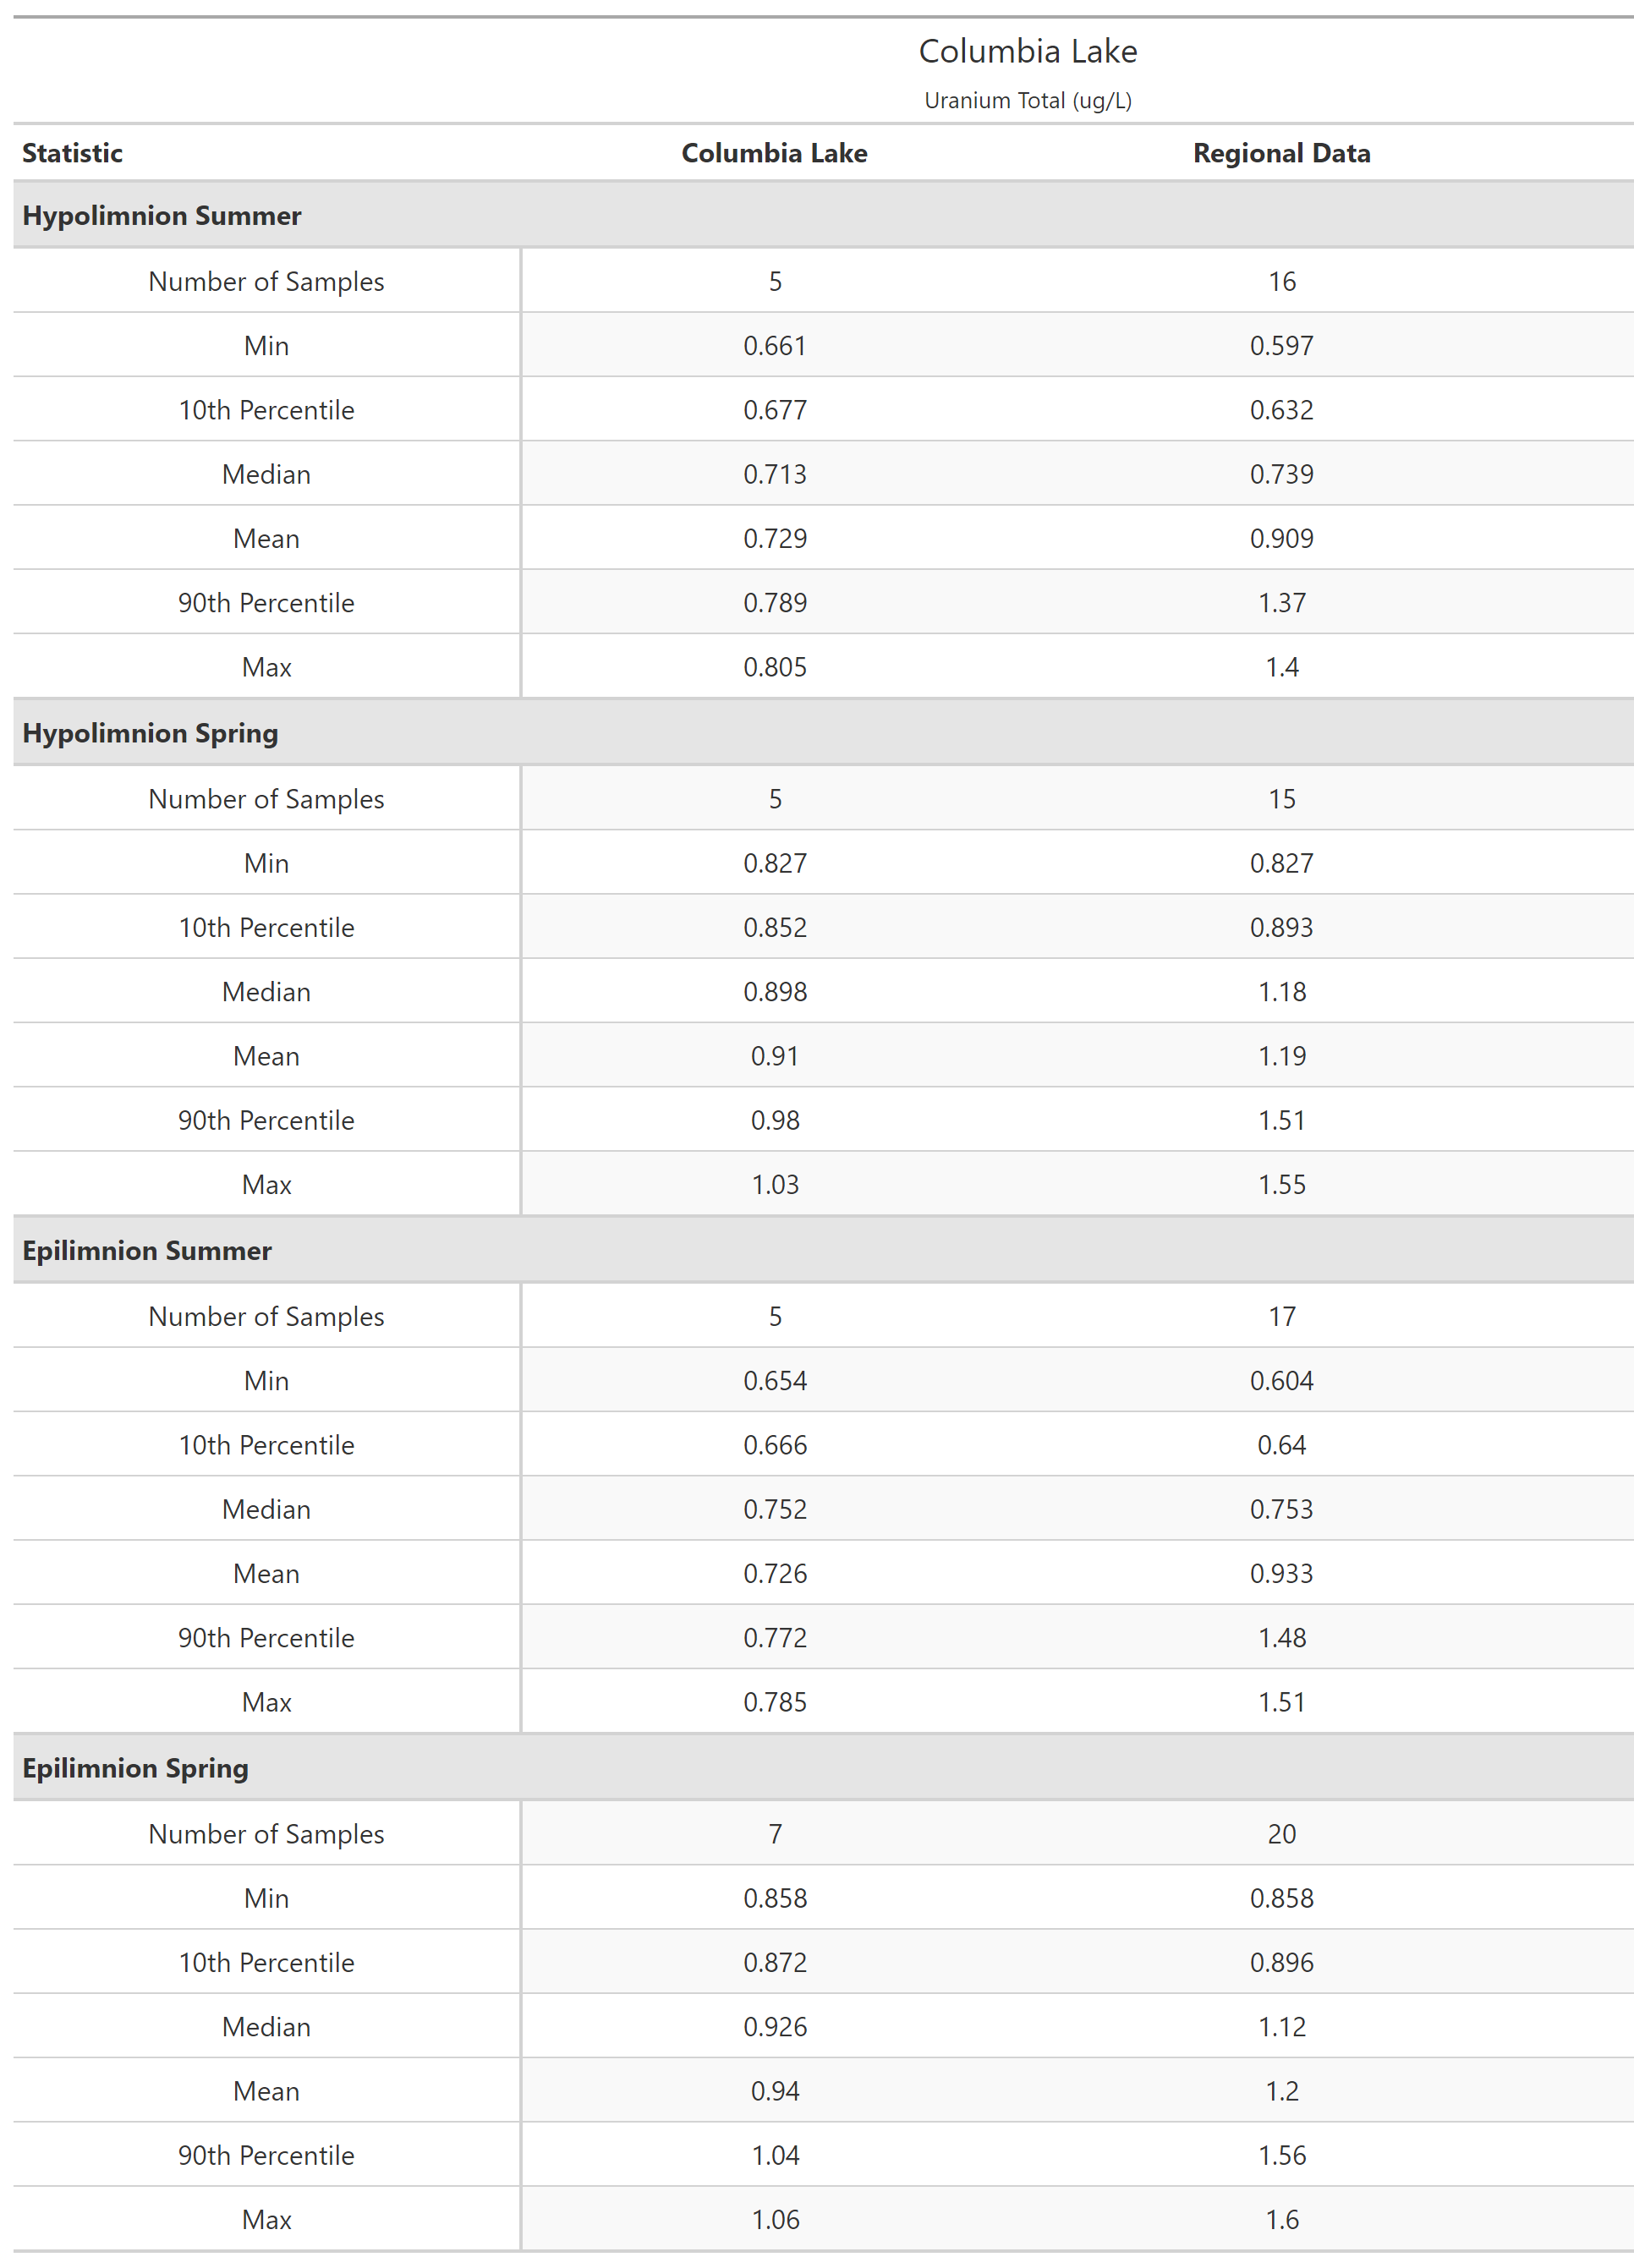 A table of summary statistics for Uranium Total with comparison to regional data